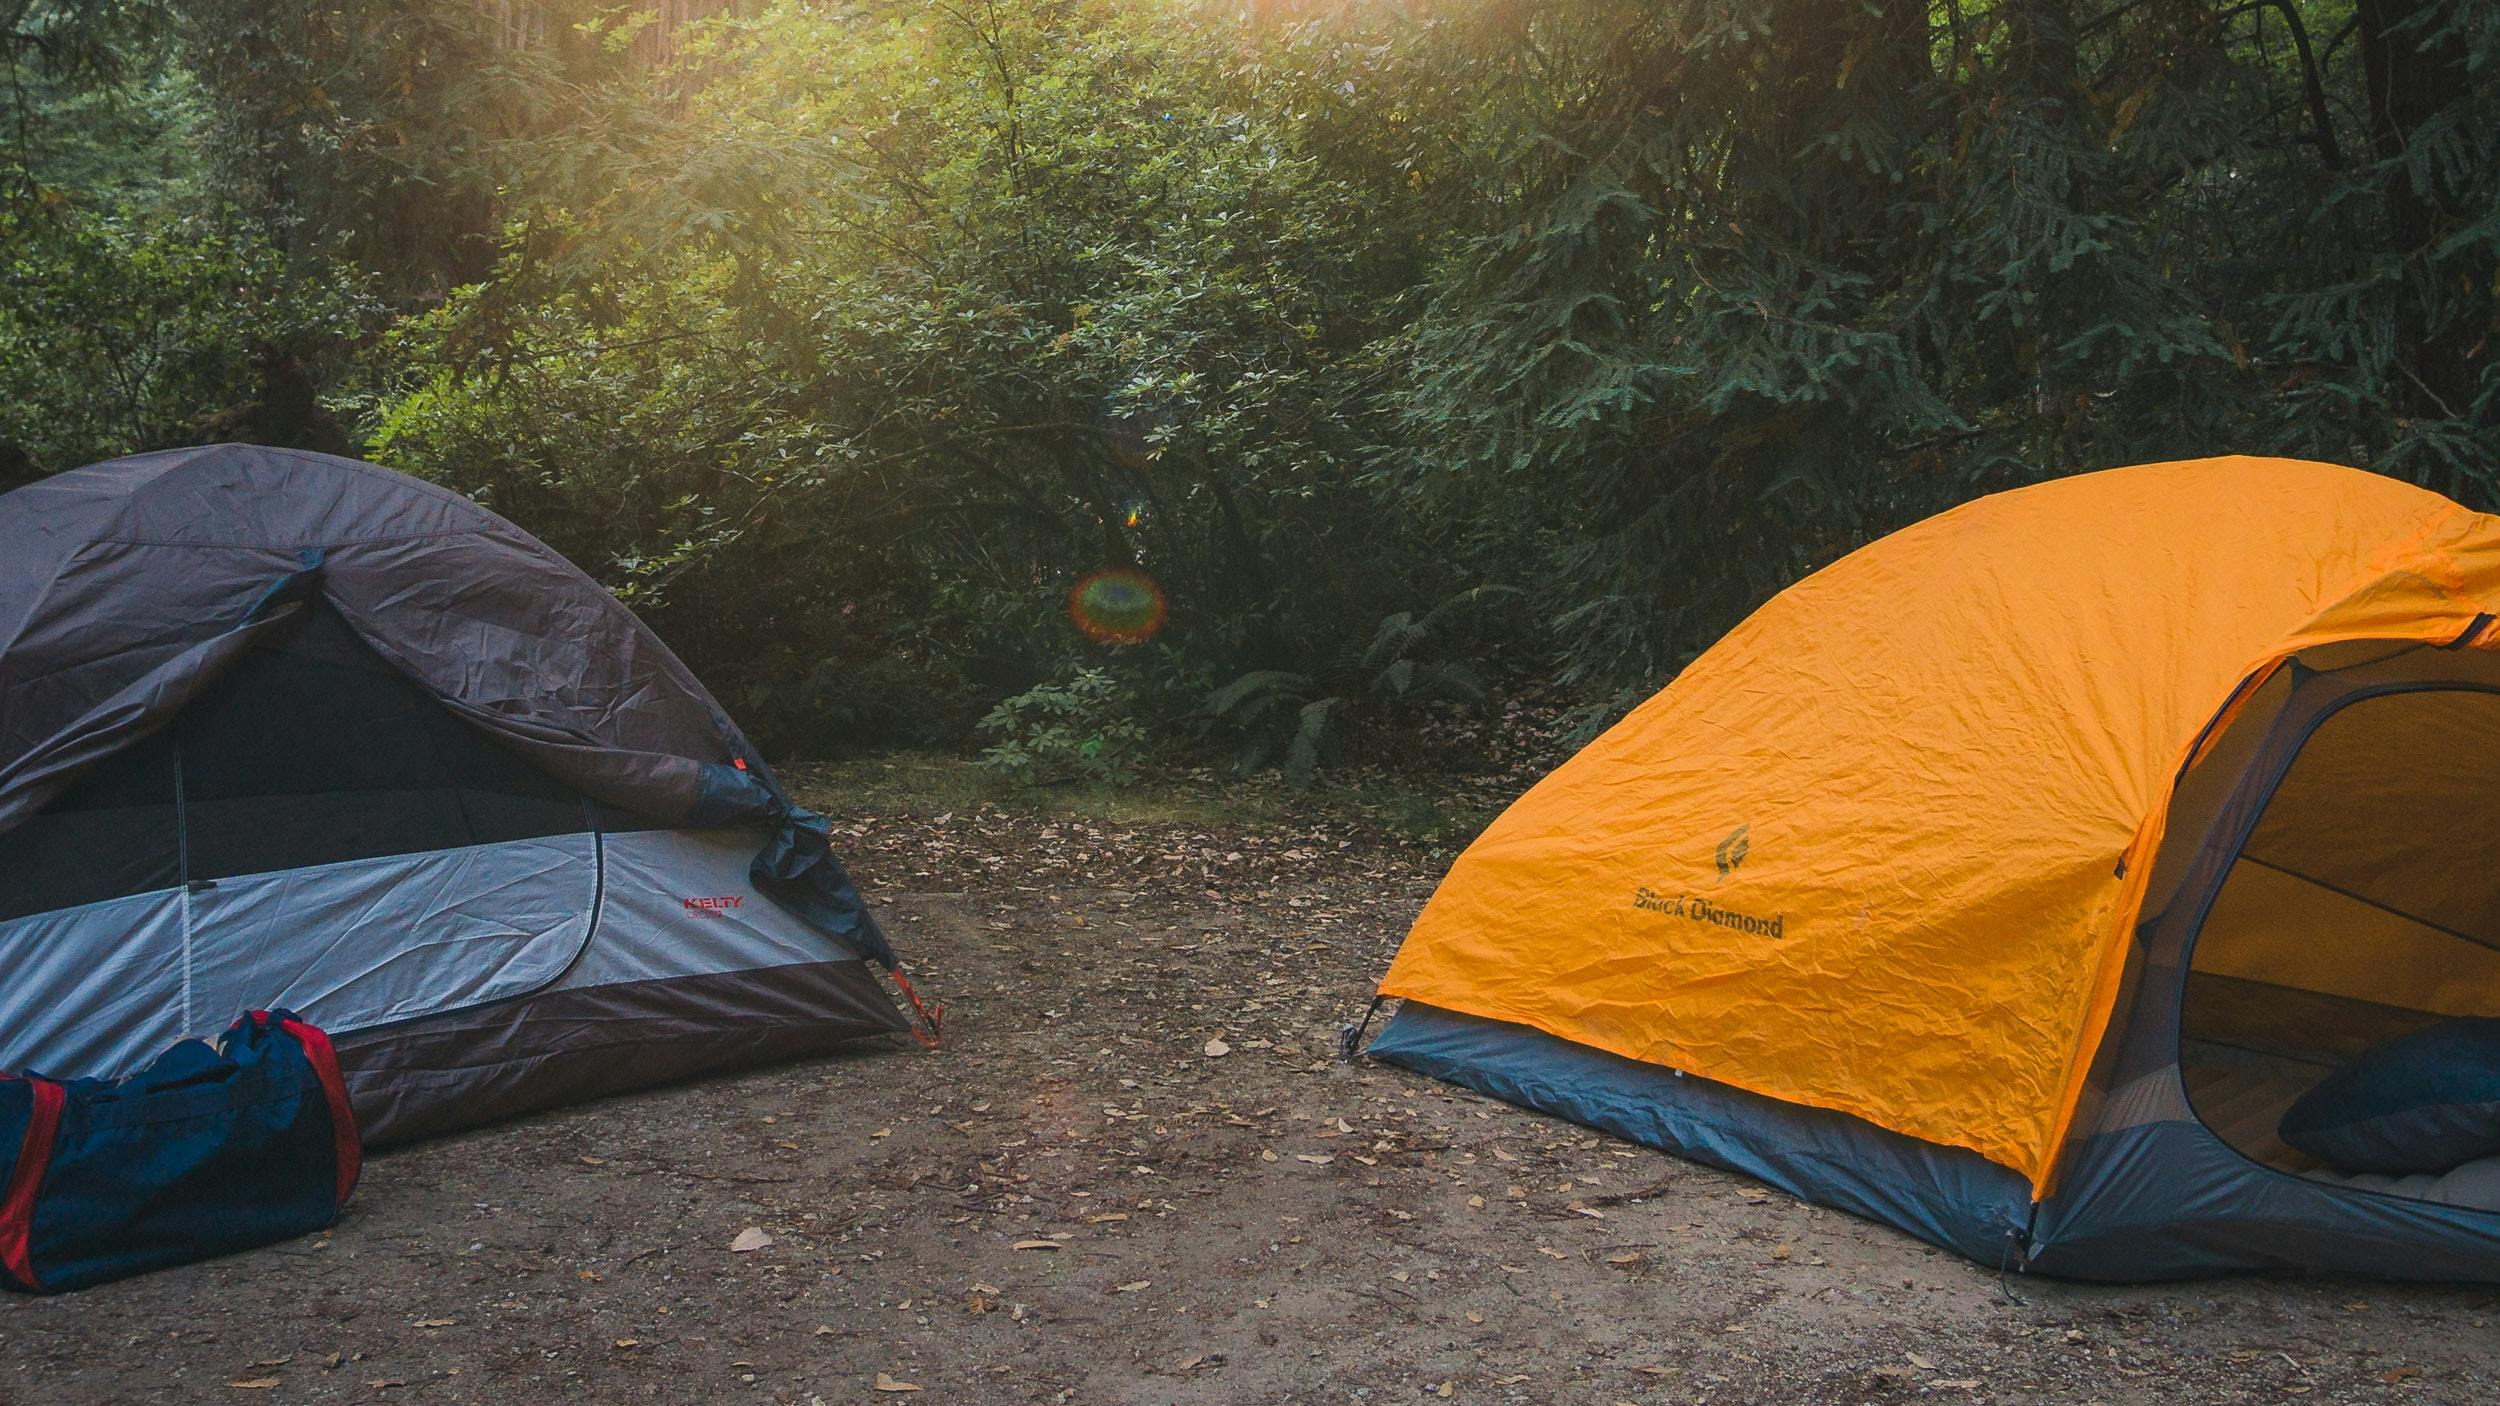 A campsite in a forest with two tents in front of trees